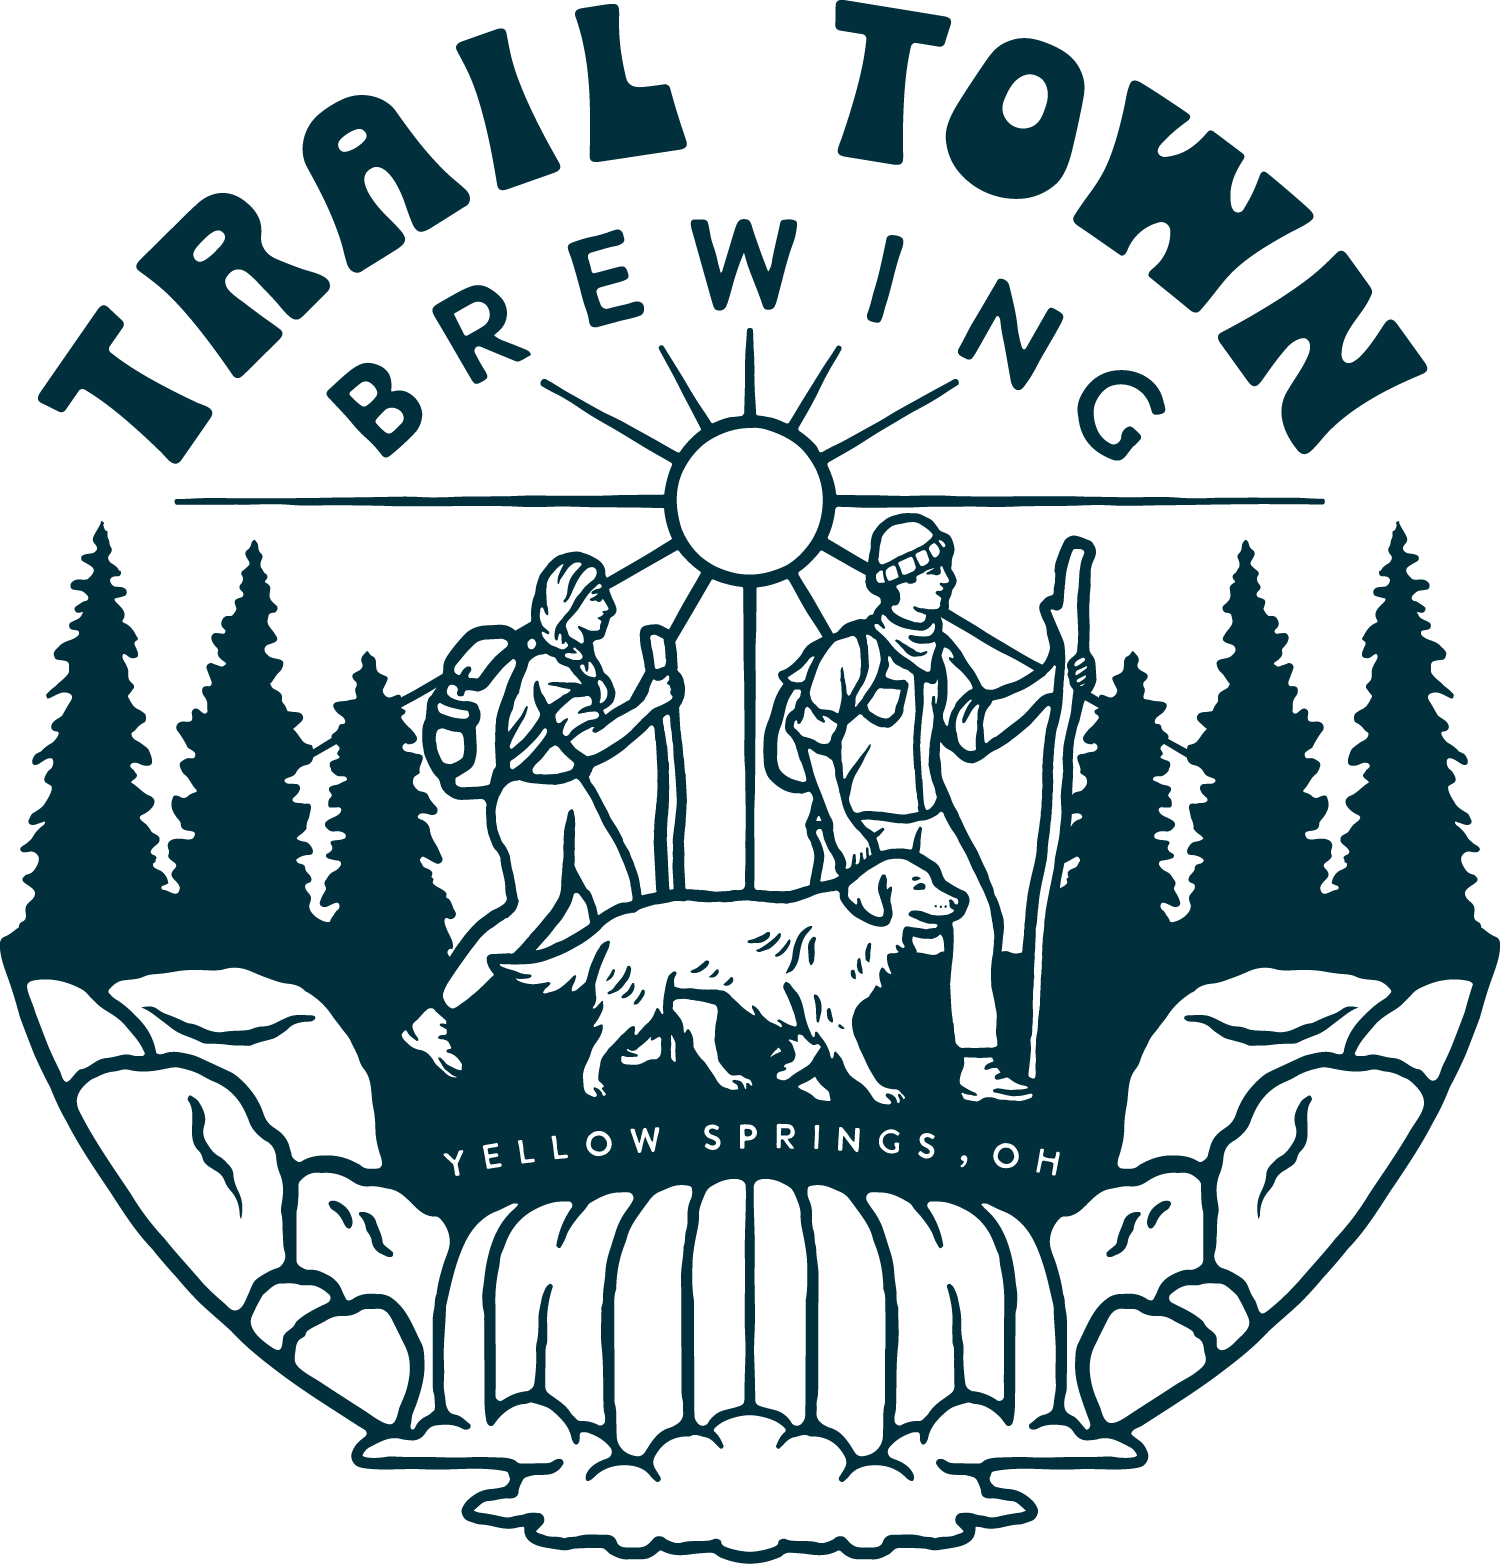 Trail Town Brewing